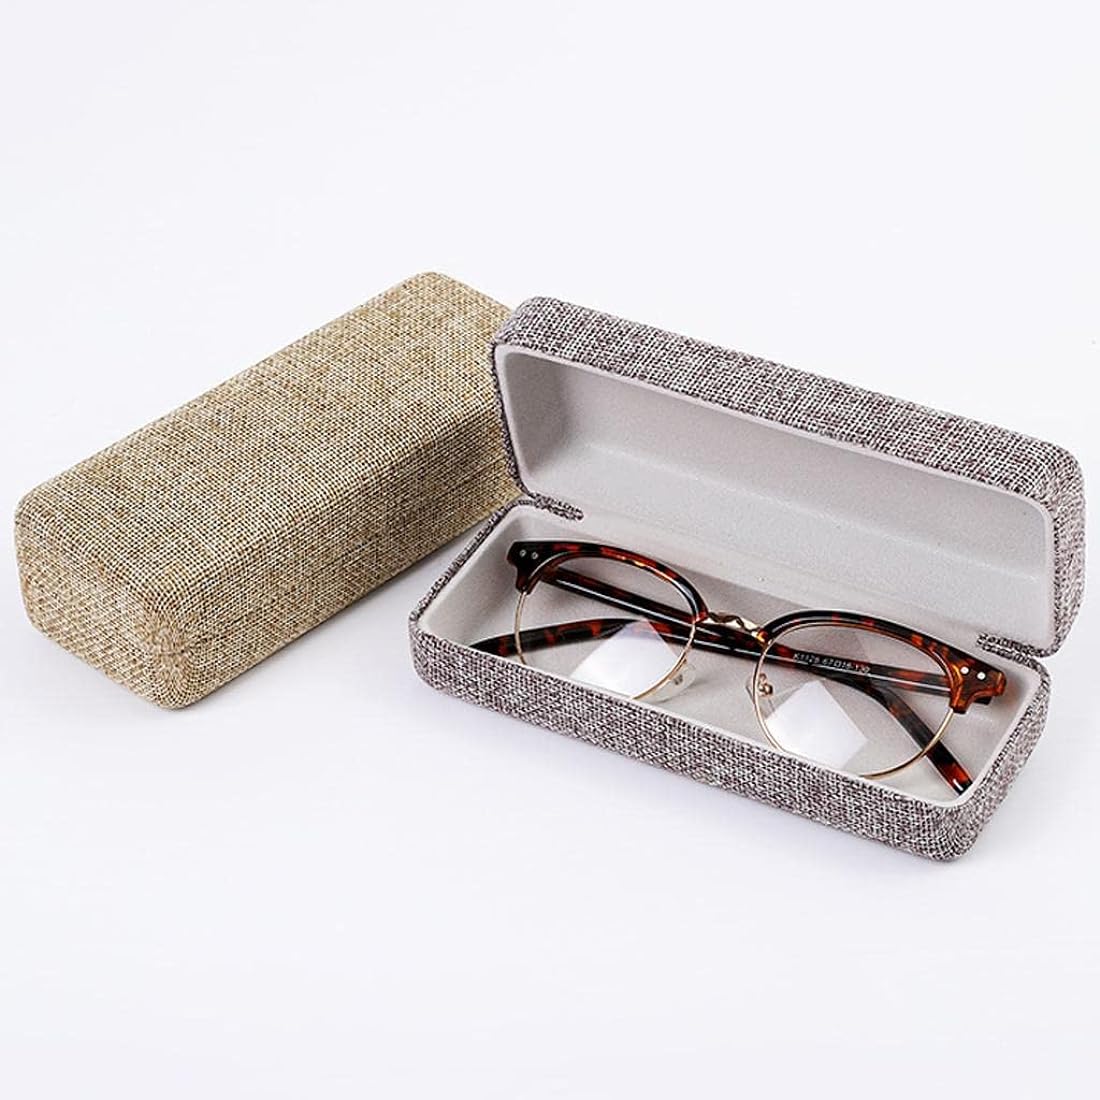 A classic and luxurious gift in the form of glasses for Christmas